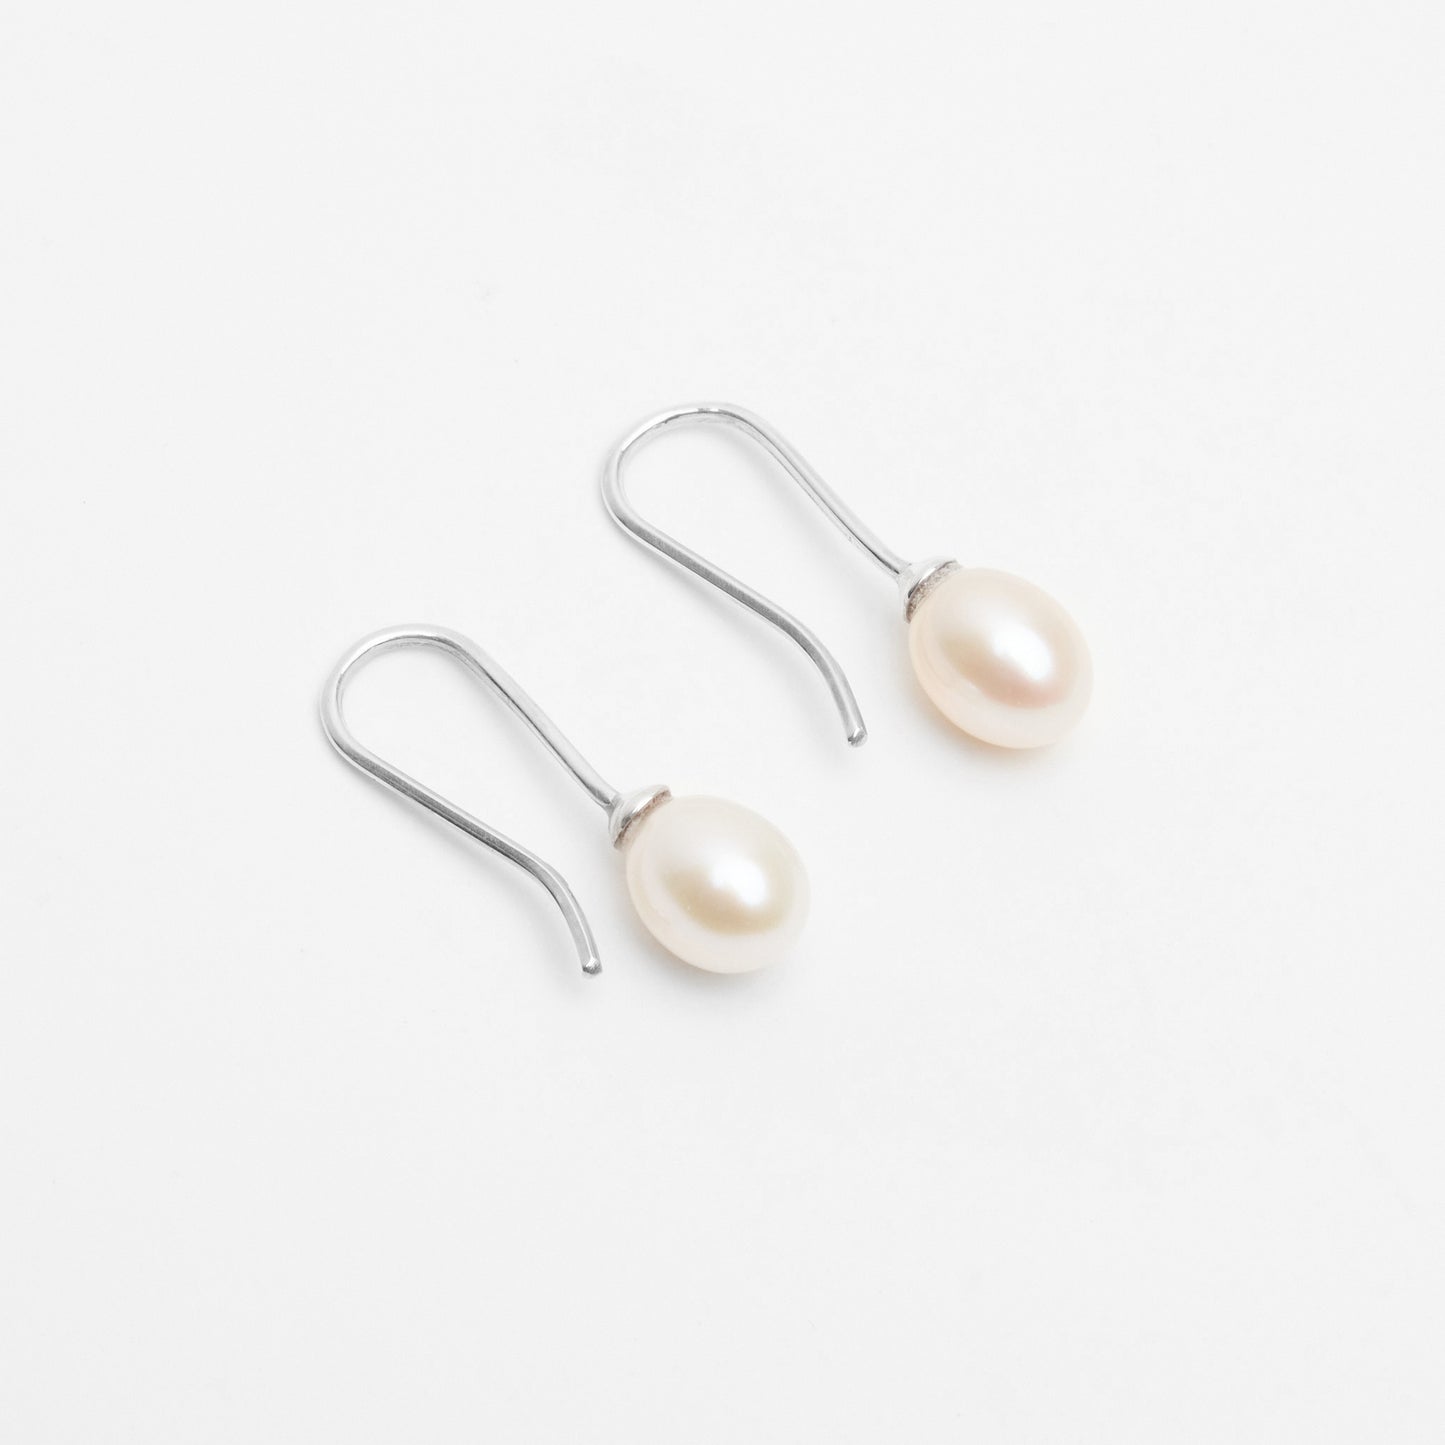 7mm Sia Silver Hook Drop Earrings with White Pearl